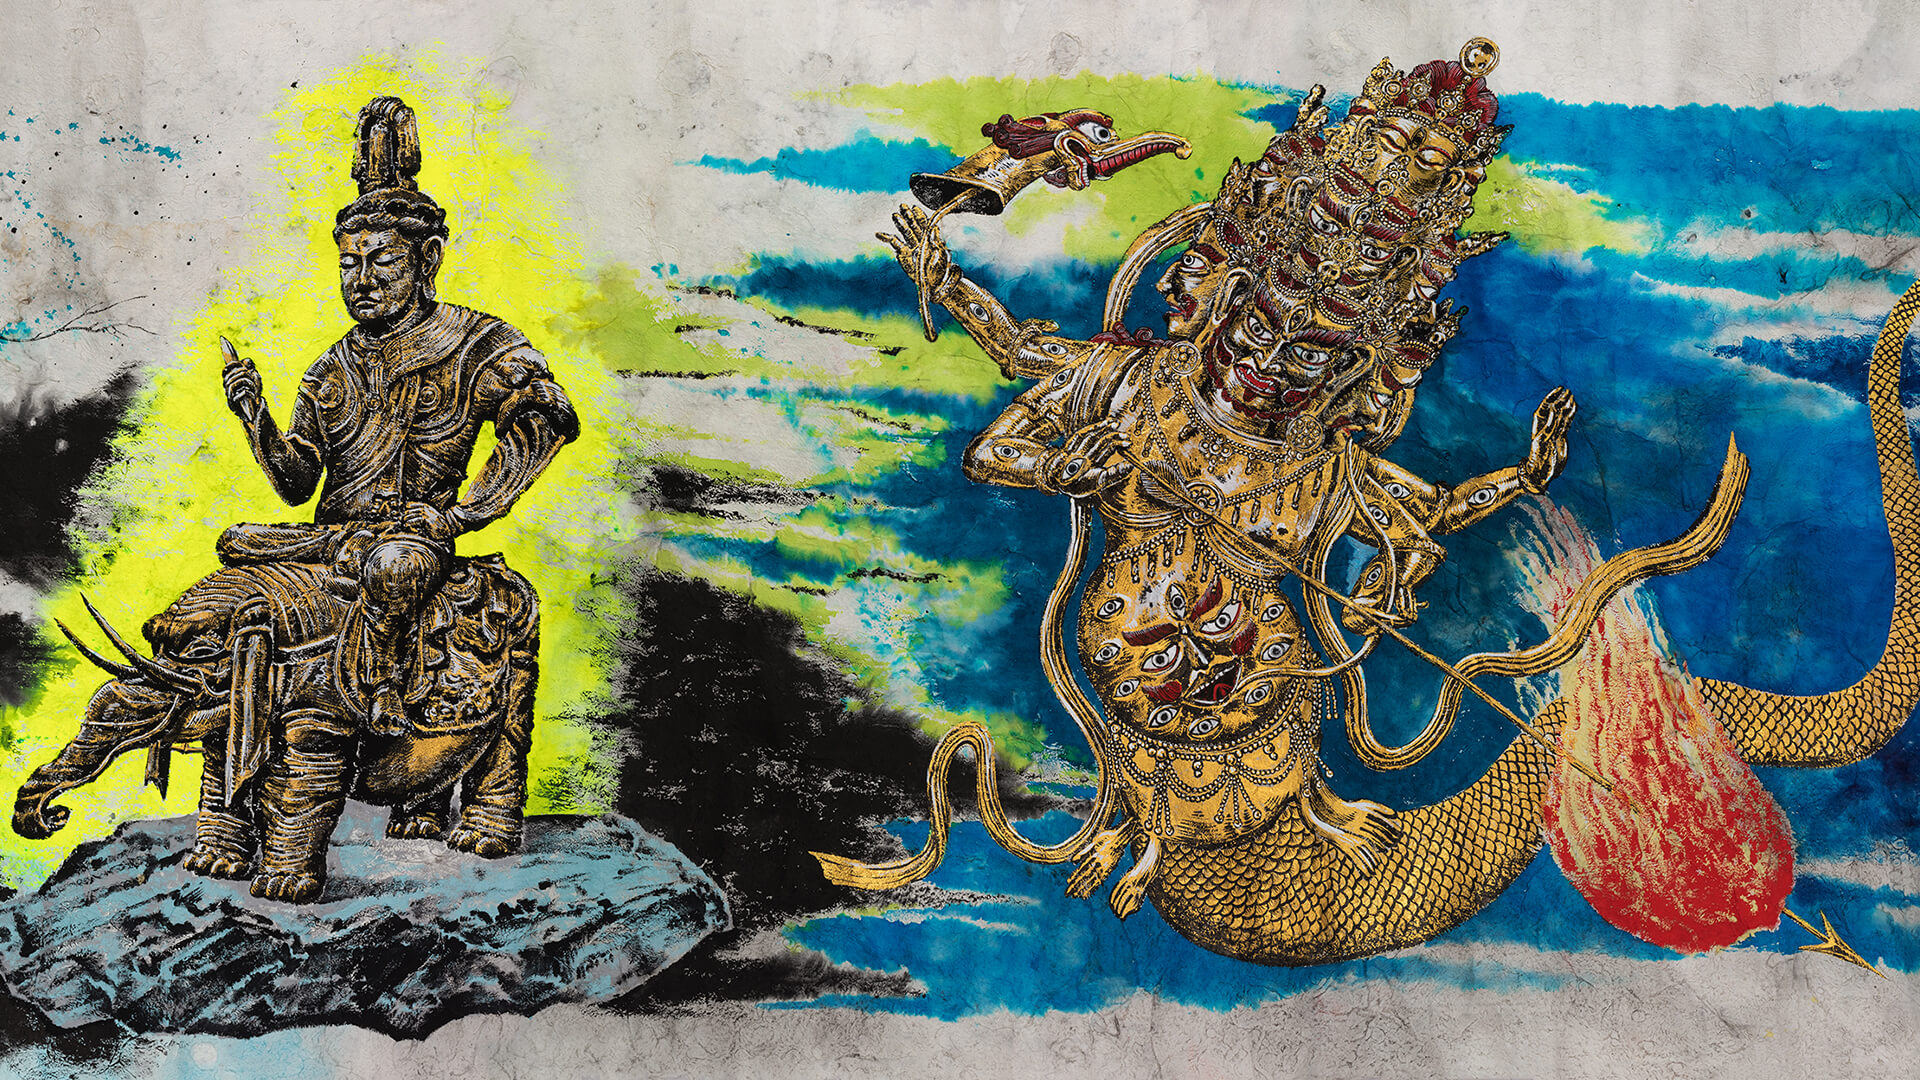 Sun Xun, Mythology or Rebellious Bone, 2020 (detail), ink, gold leaf, natural colour pigment on paper. Courtesy of the Artist and ShanghART Gallery.